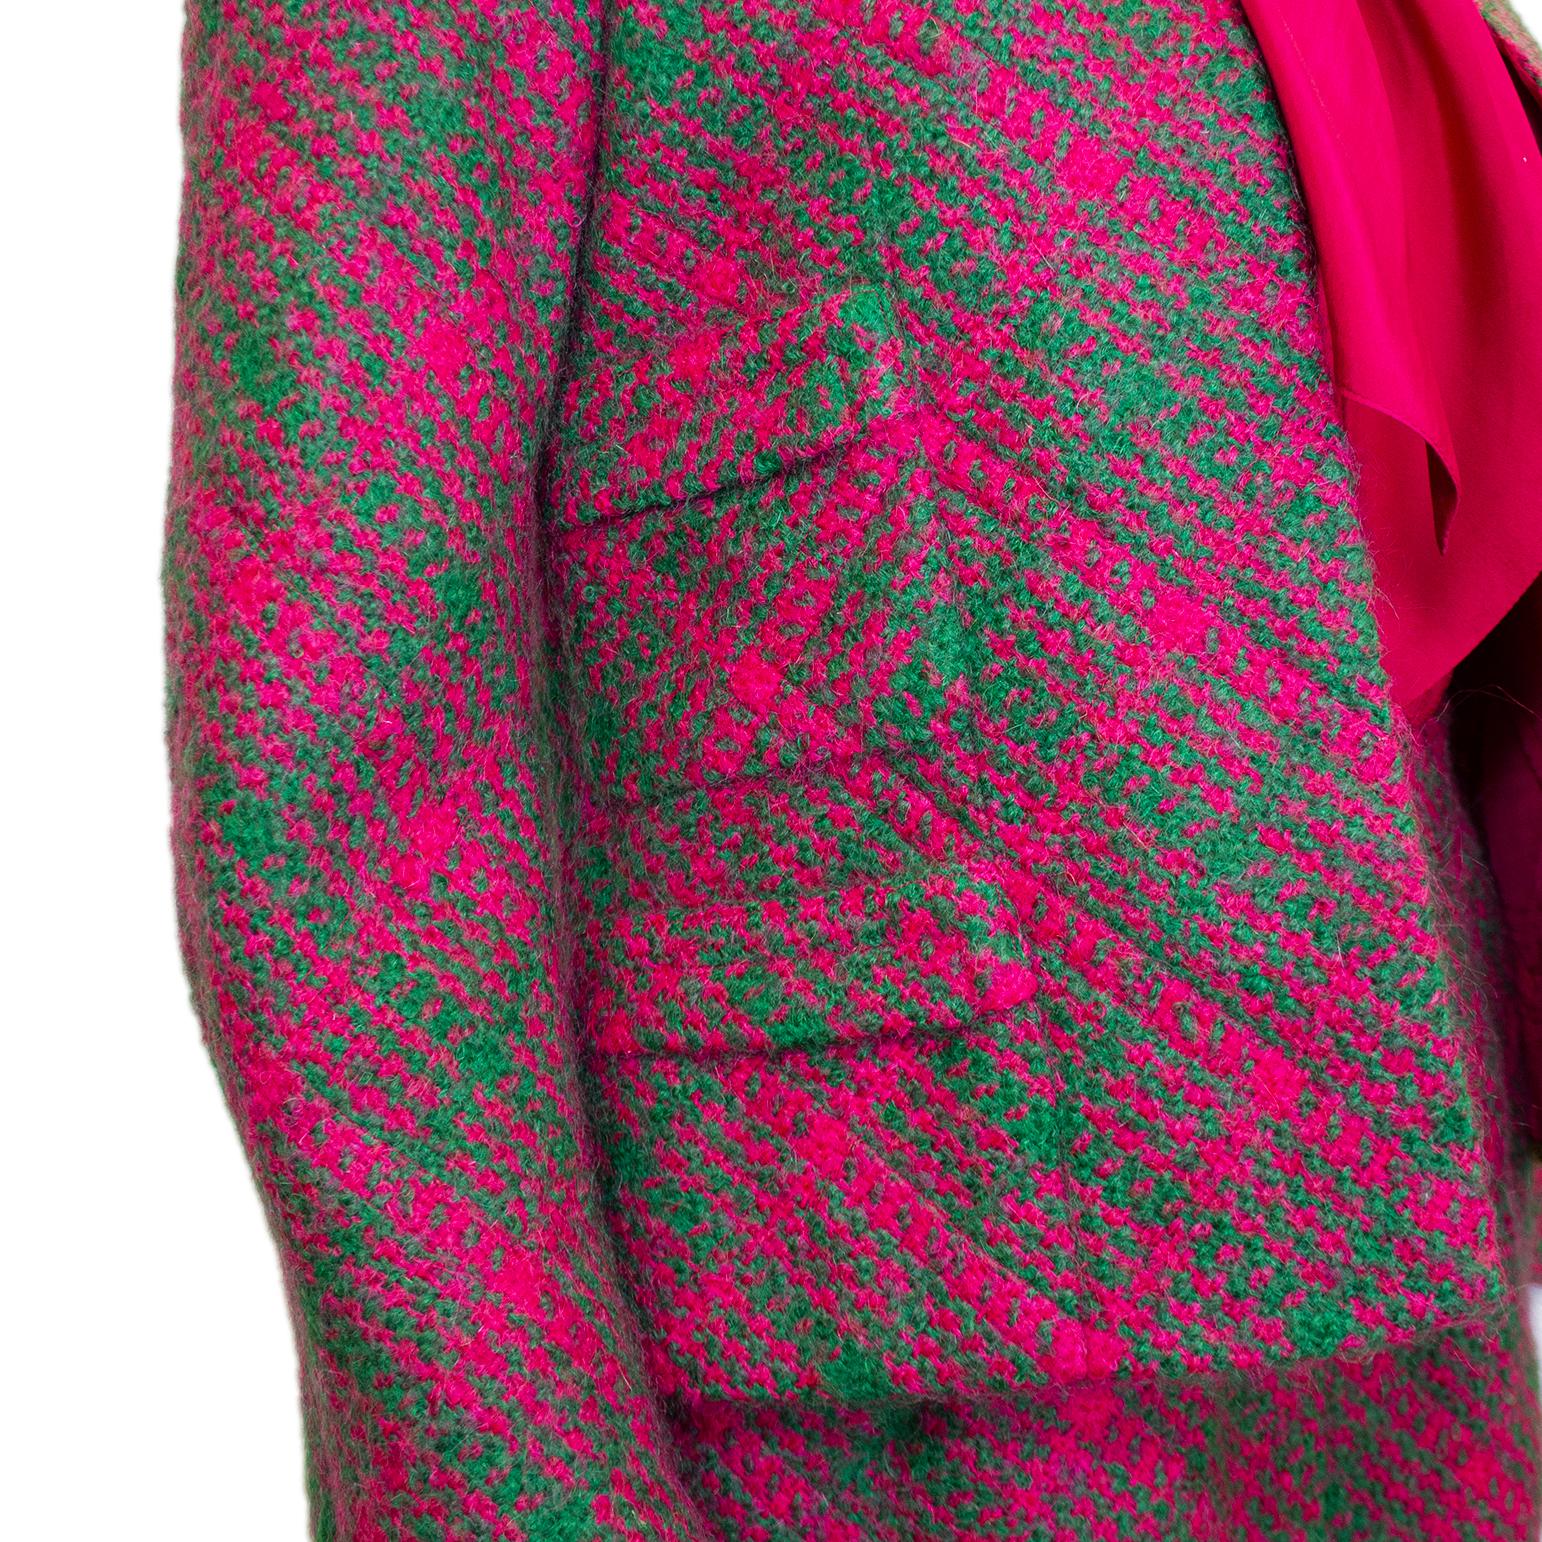 1960s Chanel Haute Couture Magenta and Green Dress and Jacket Ensemble For Sale 2